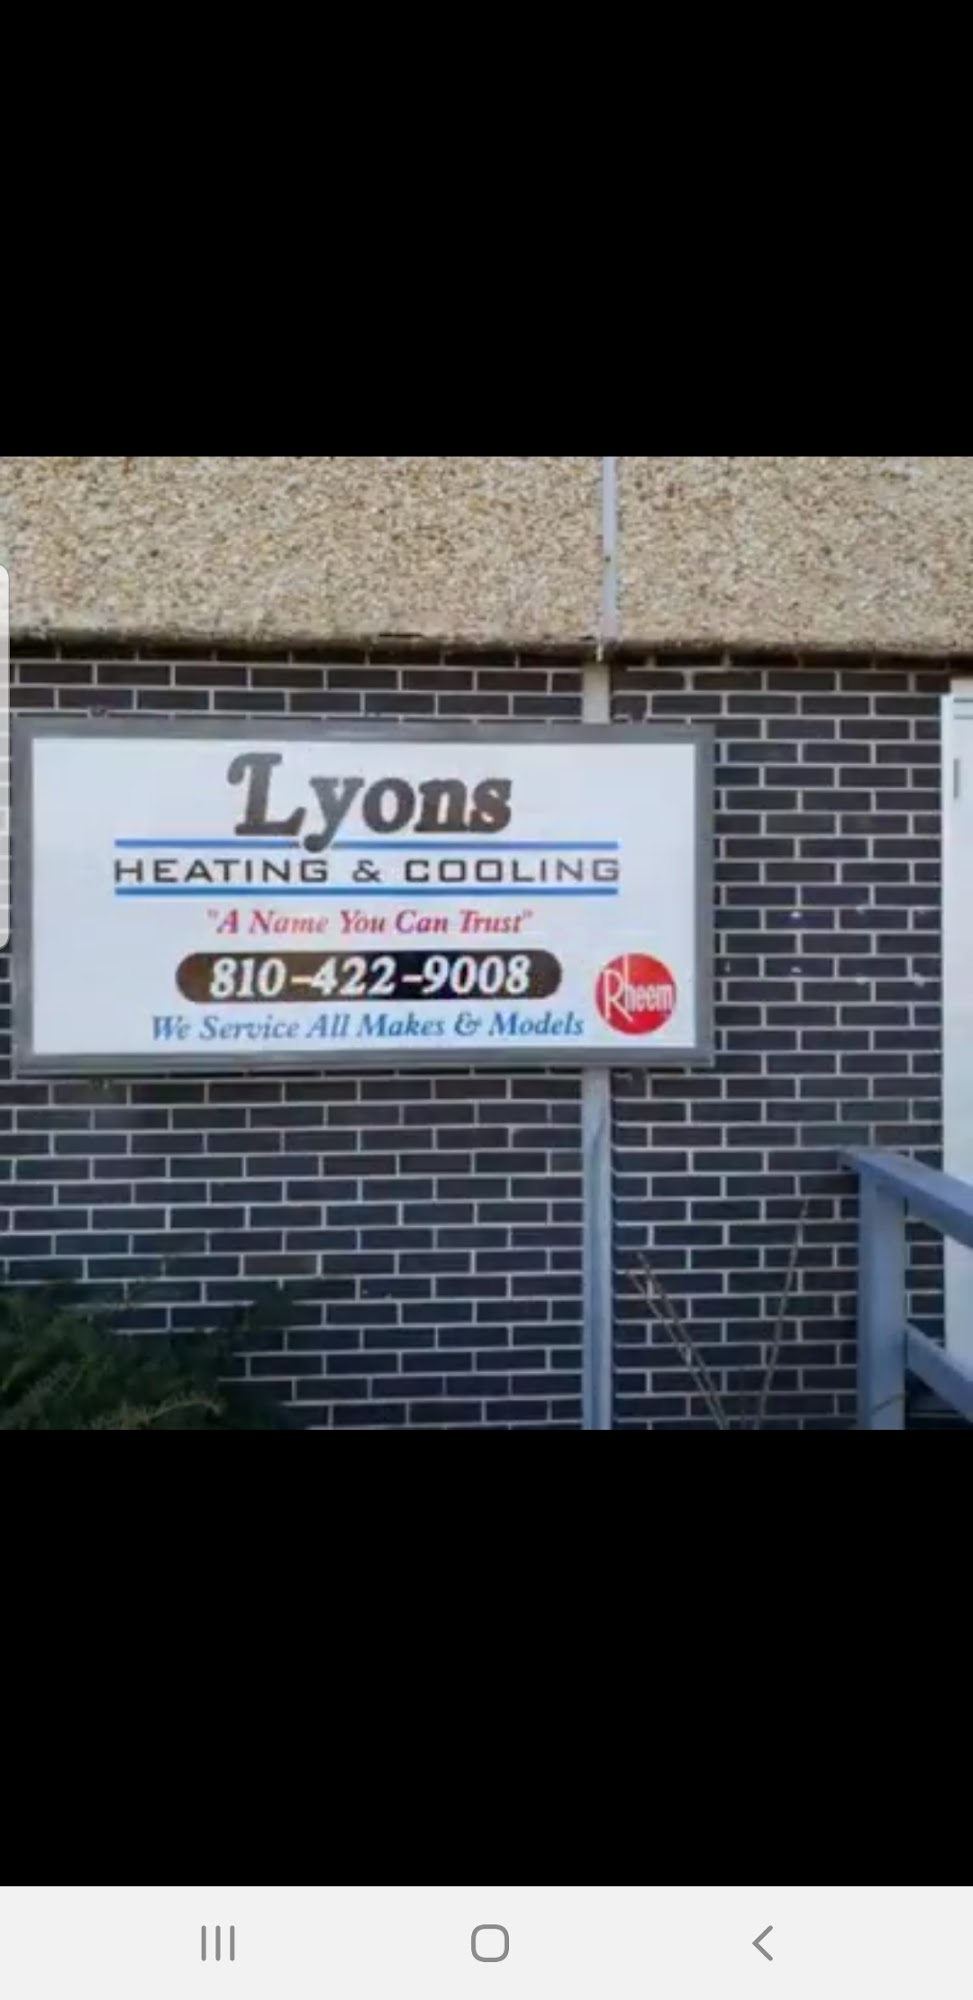 Lyons Heating & Cooling